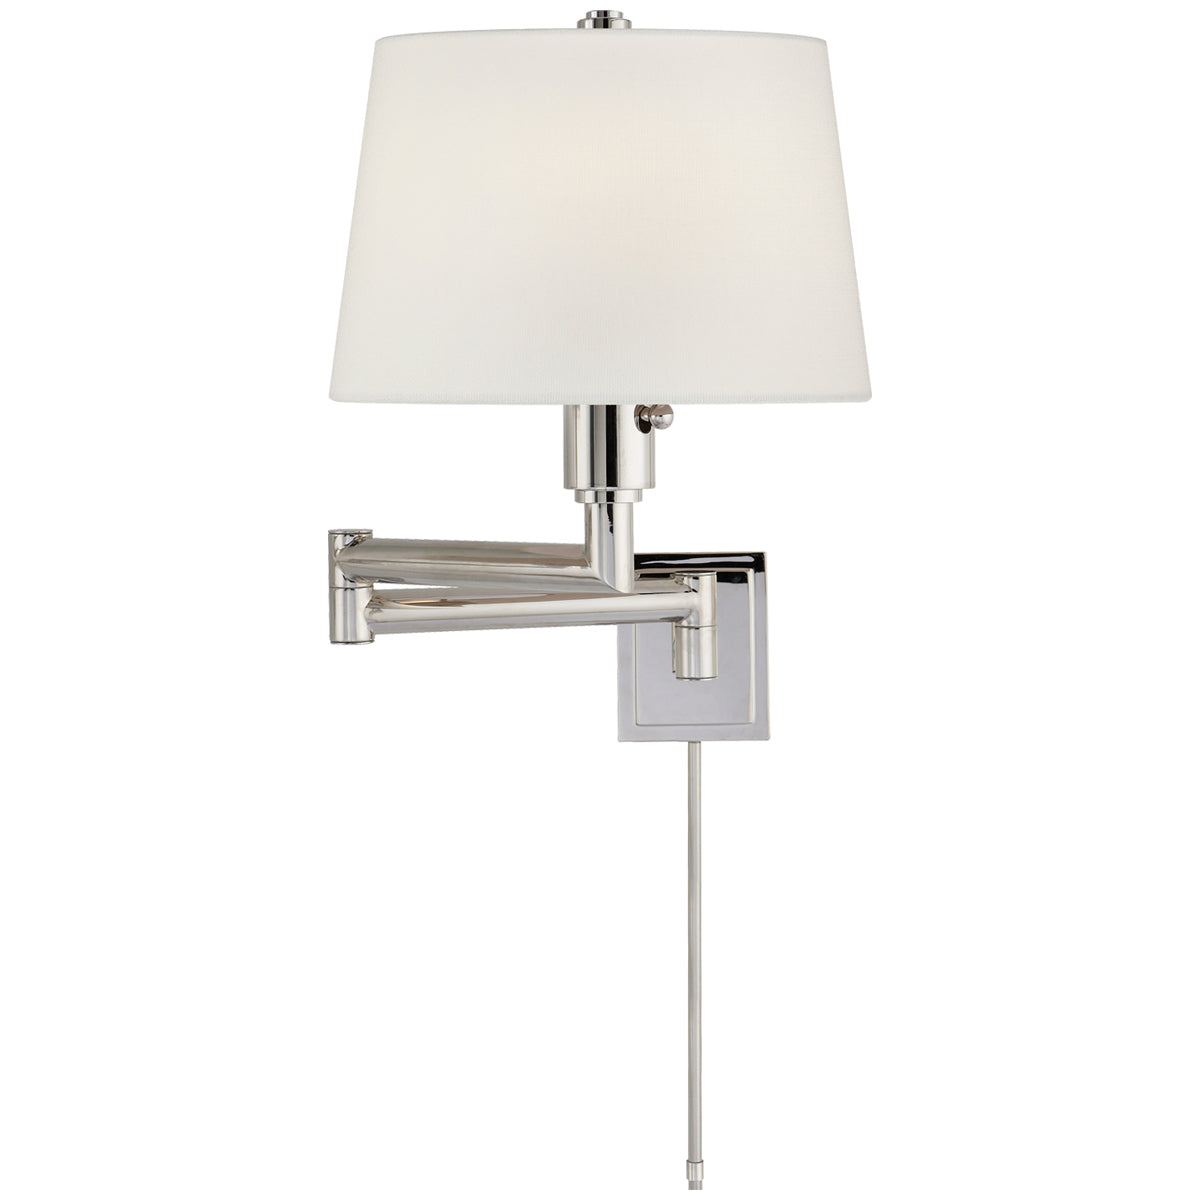 Visual Comfort Chunky Swing Arm Wall Light with Linen Shade